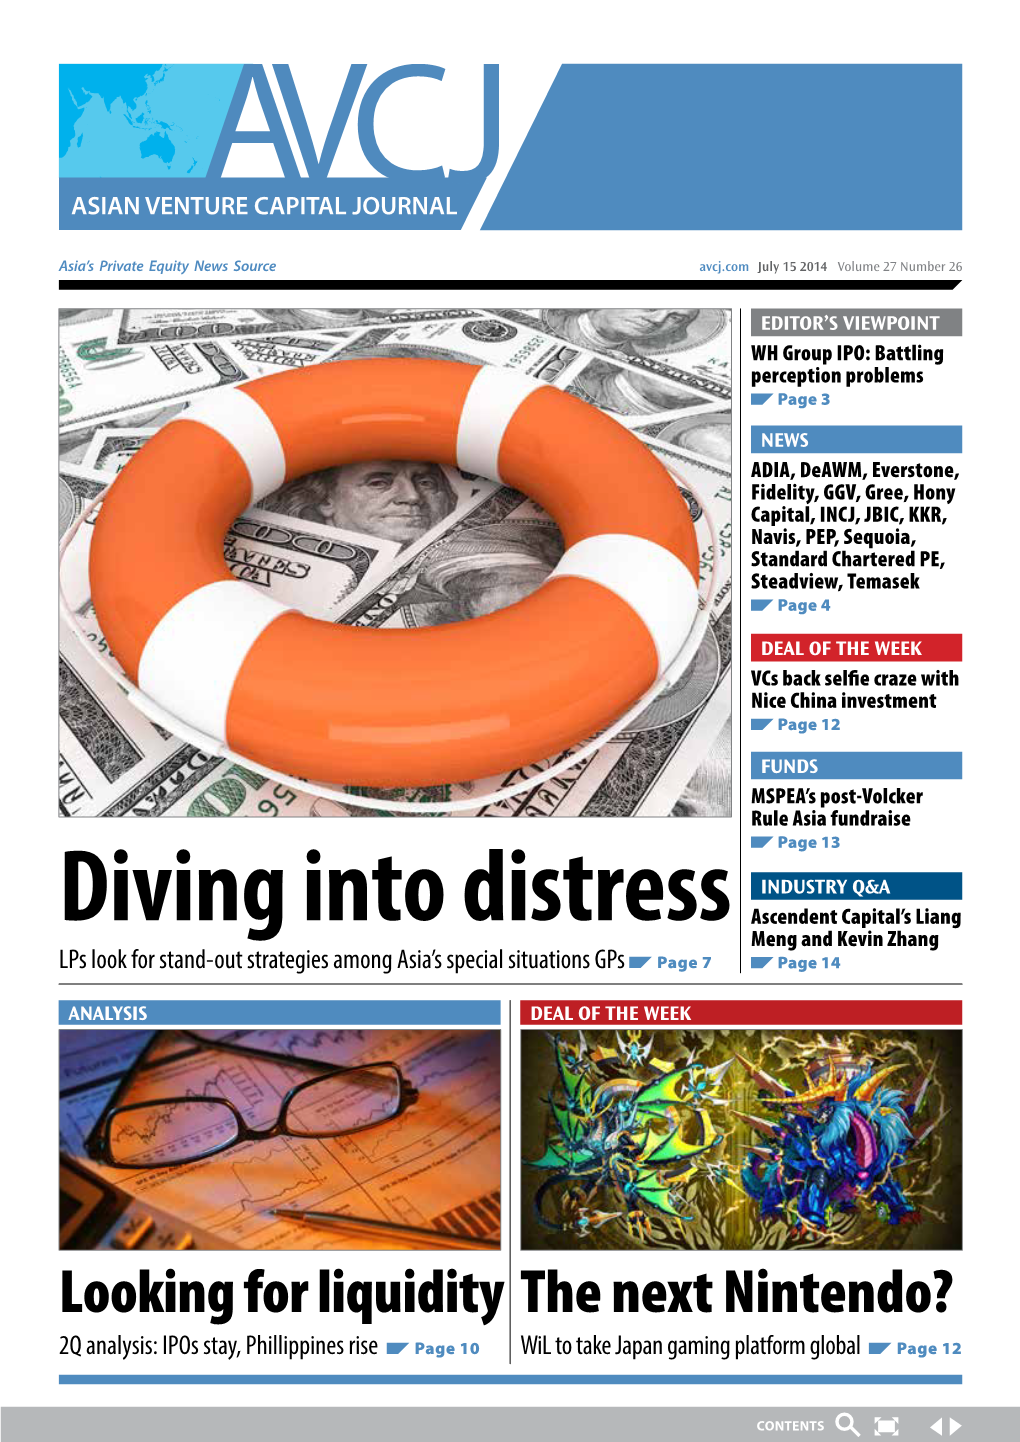 Diving Into Distress Ascendent Capital’S Liang Meng and Kevin Zhang Lps Look for Stand-Out Strategies Among Asia’S Special Situations Gps Page 7 Page 14